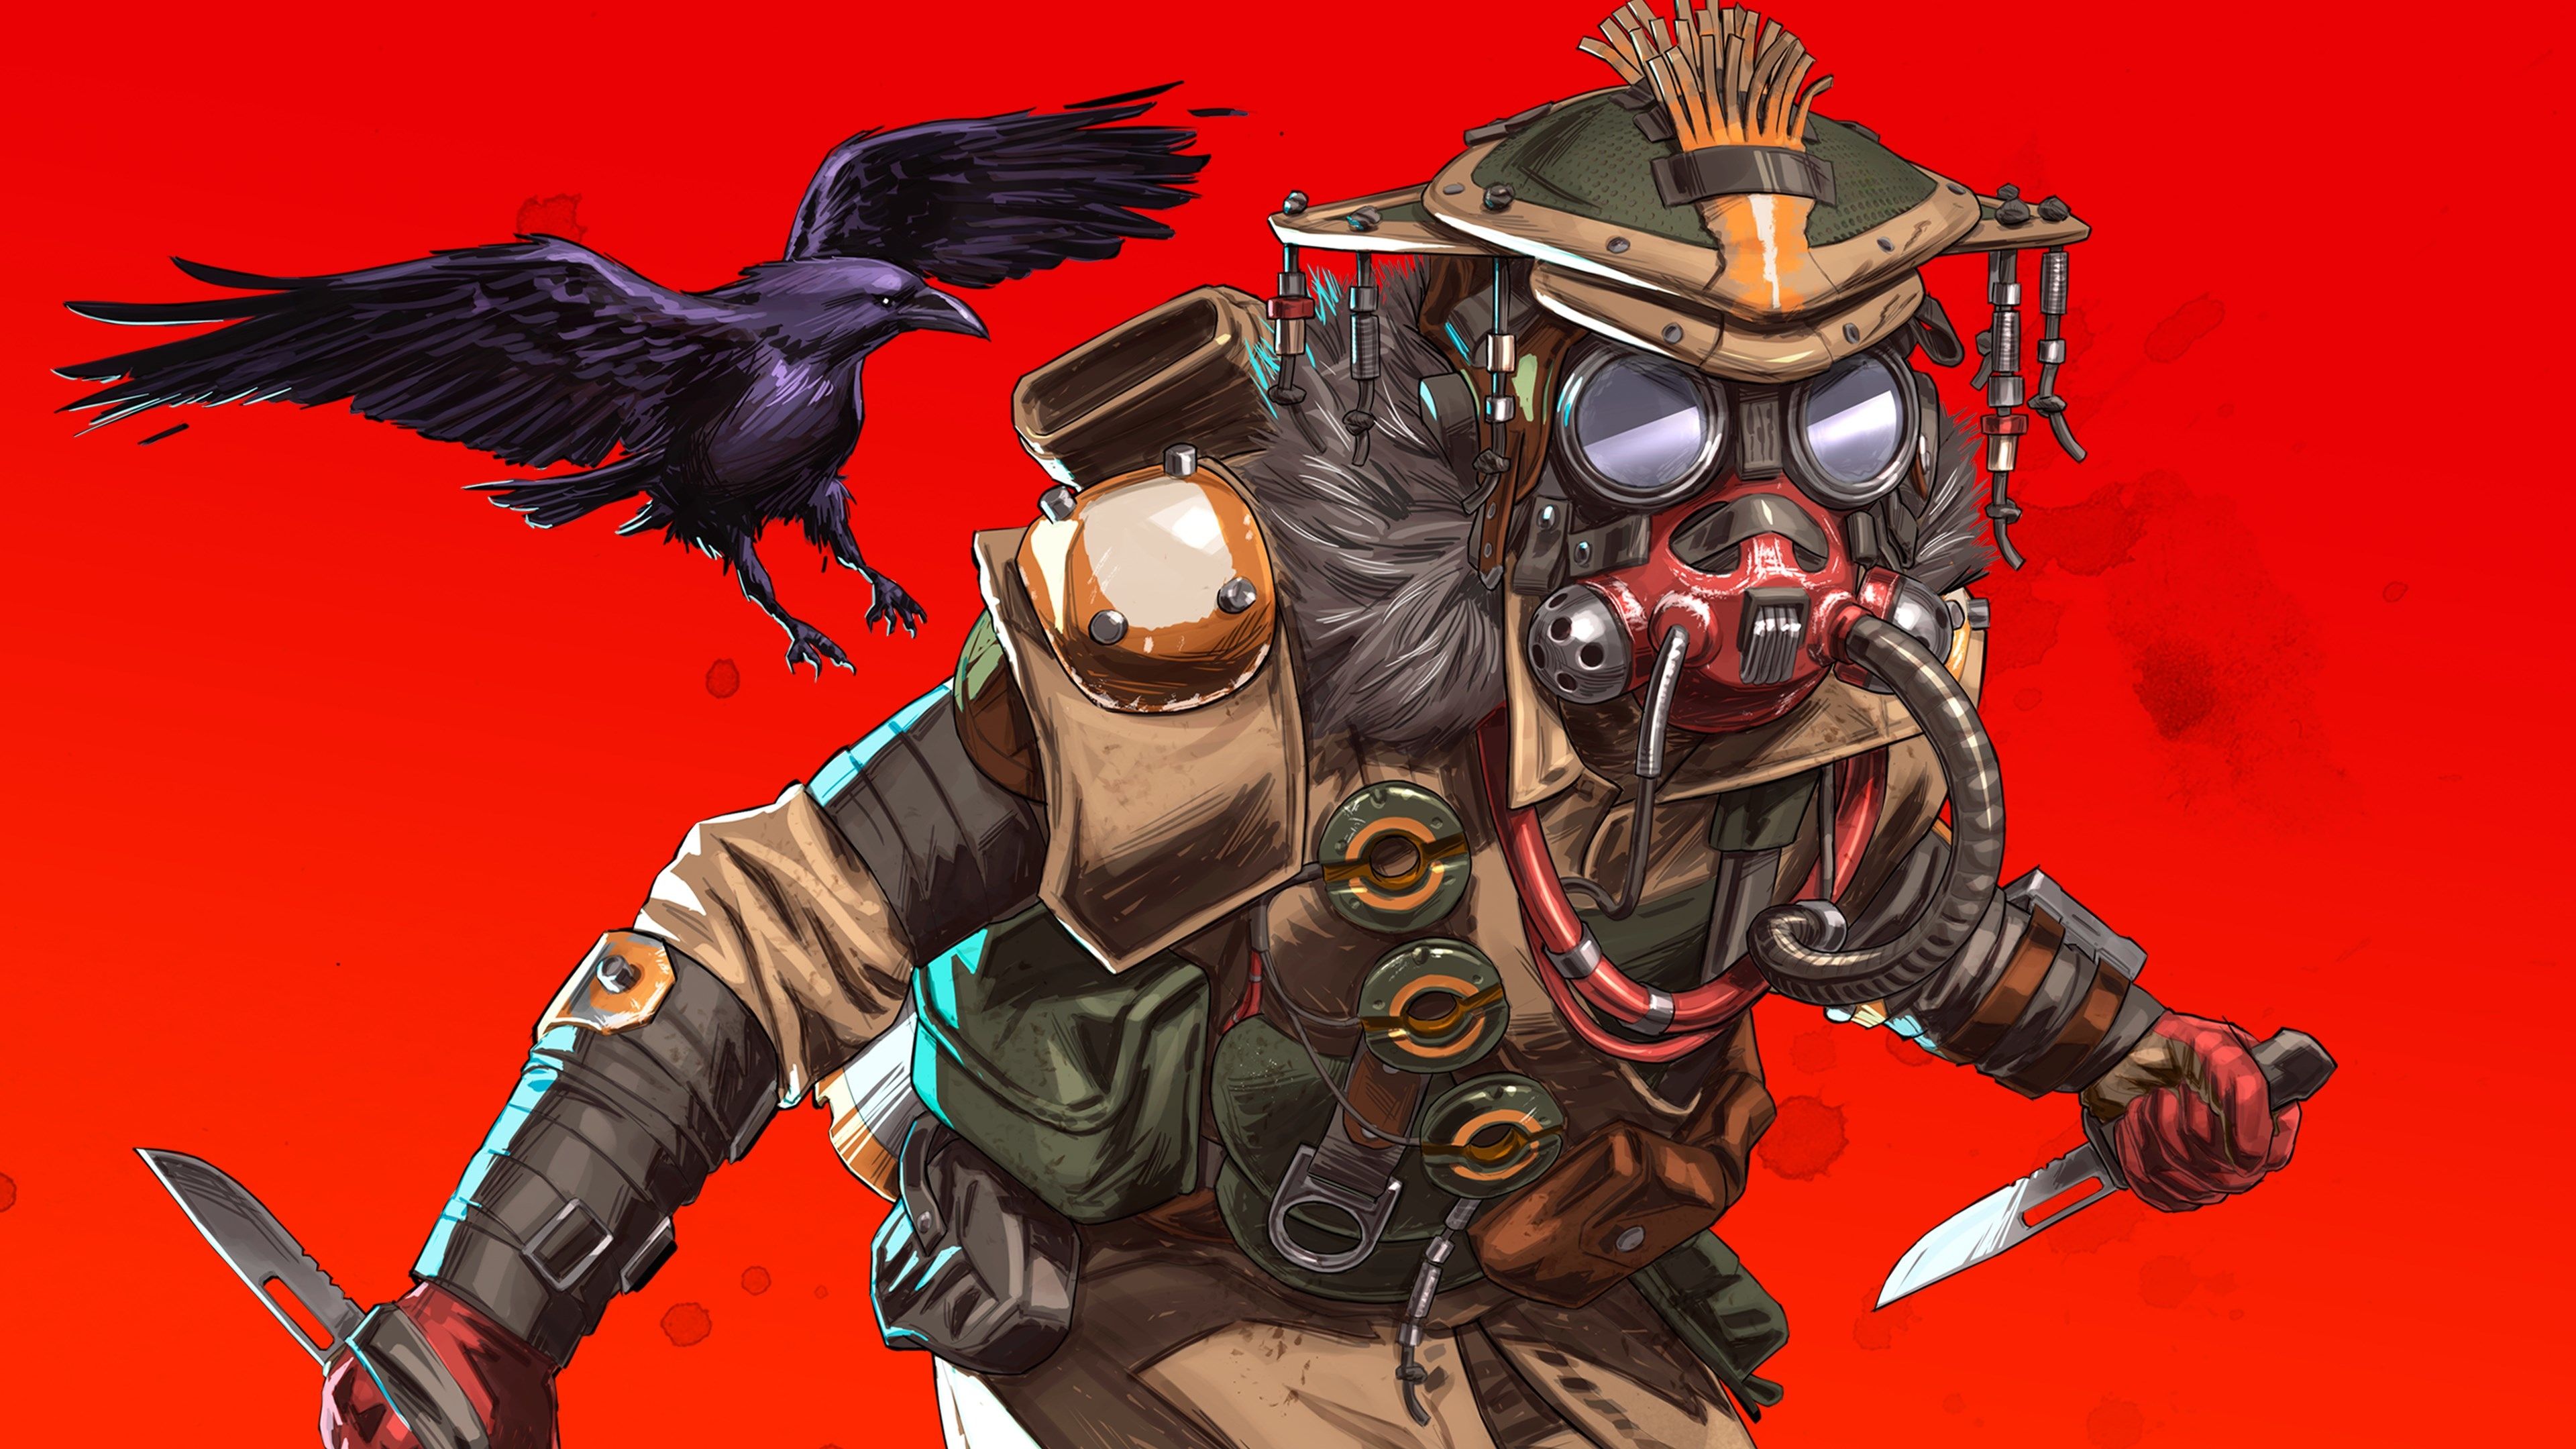 Apex Legends Bloodhound Wallpaper, HD Games 4K Wallpaper, Image, Photo and Background